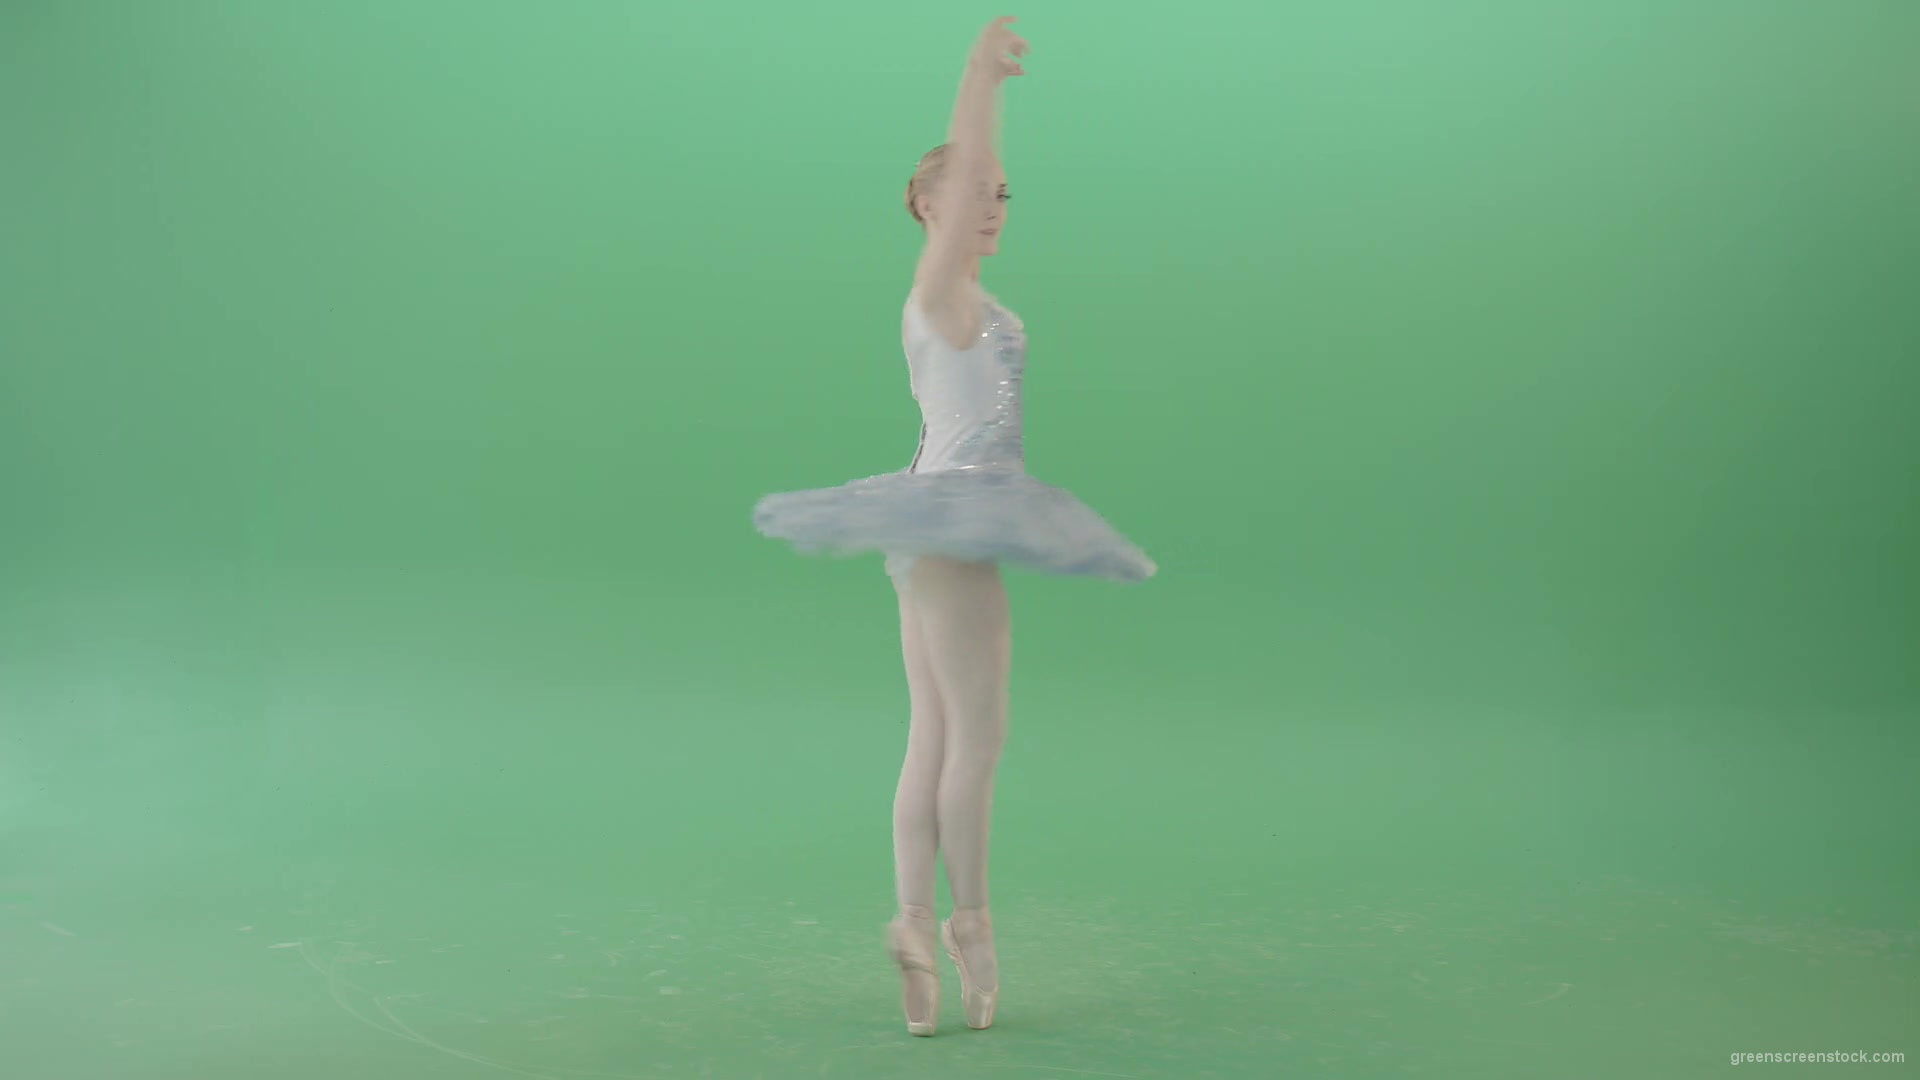 Beauty-blonde-girl-with-happy-smile-spinning-in-ballet-dress-over-green-screen-4K-Video-Footage-1920_008 Green Screen Stock